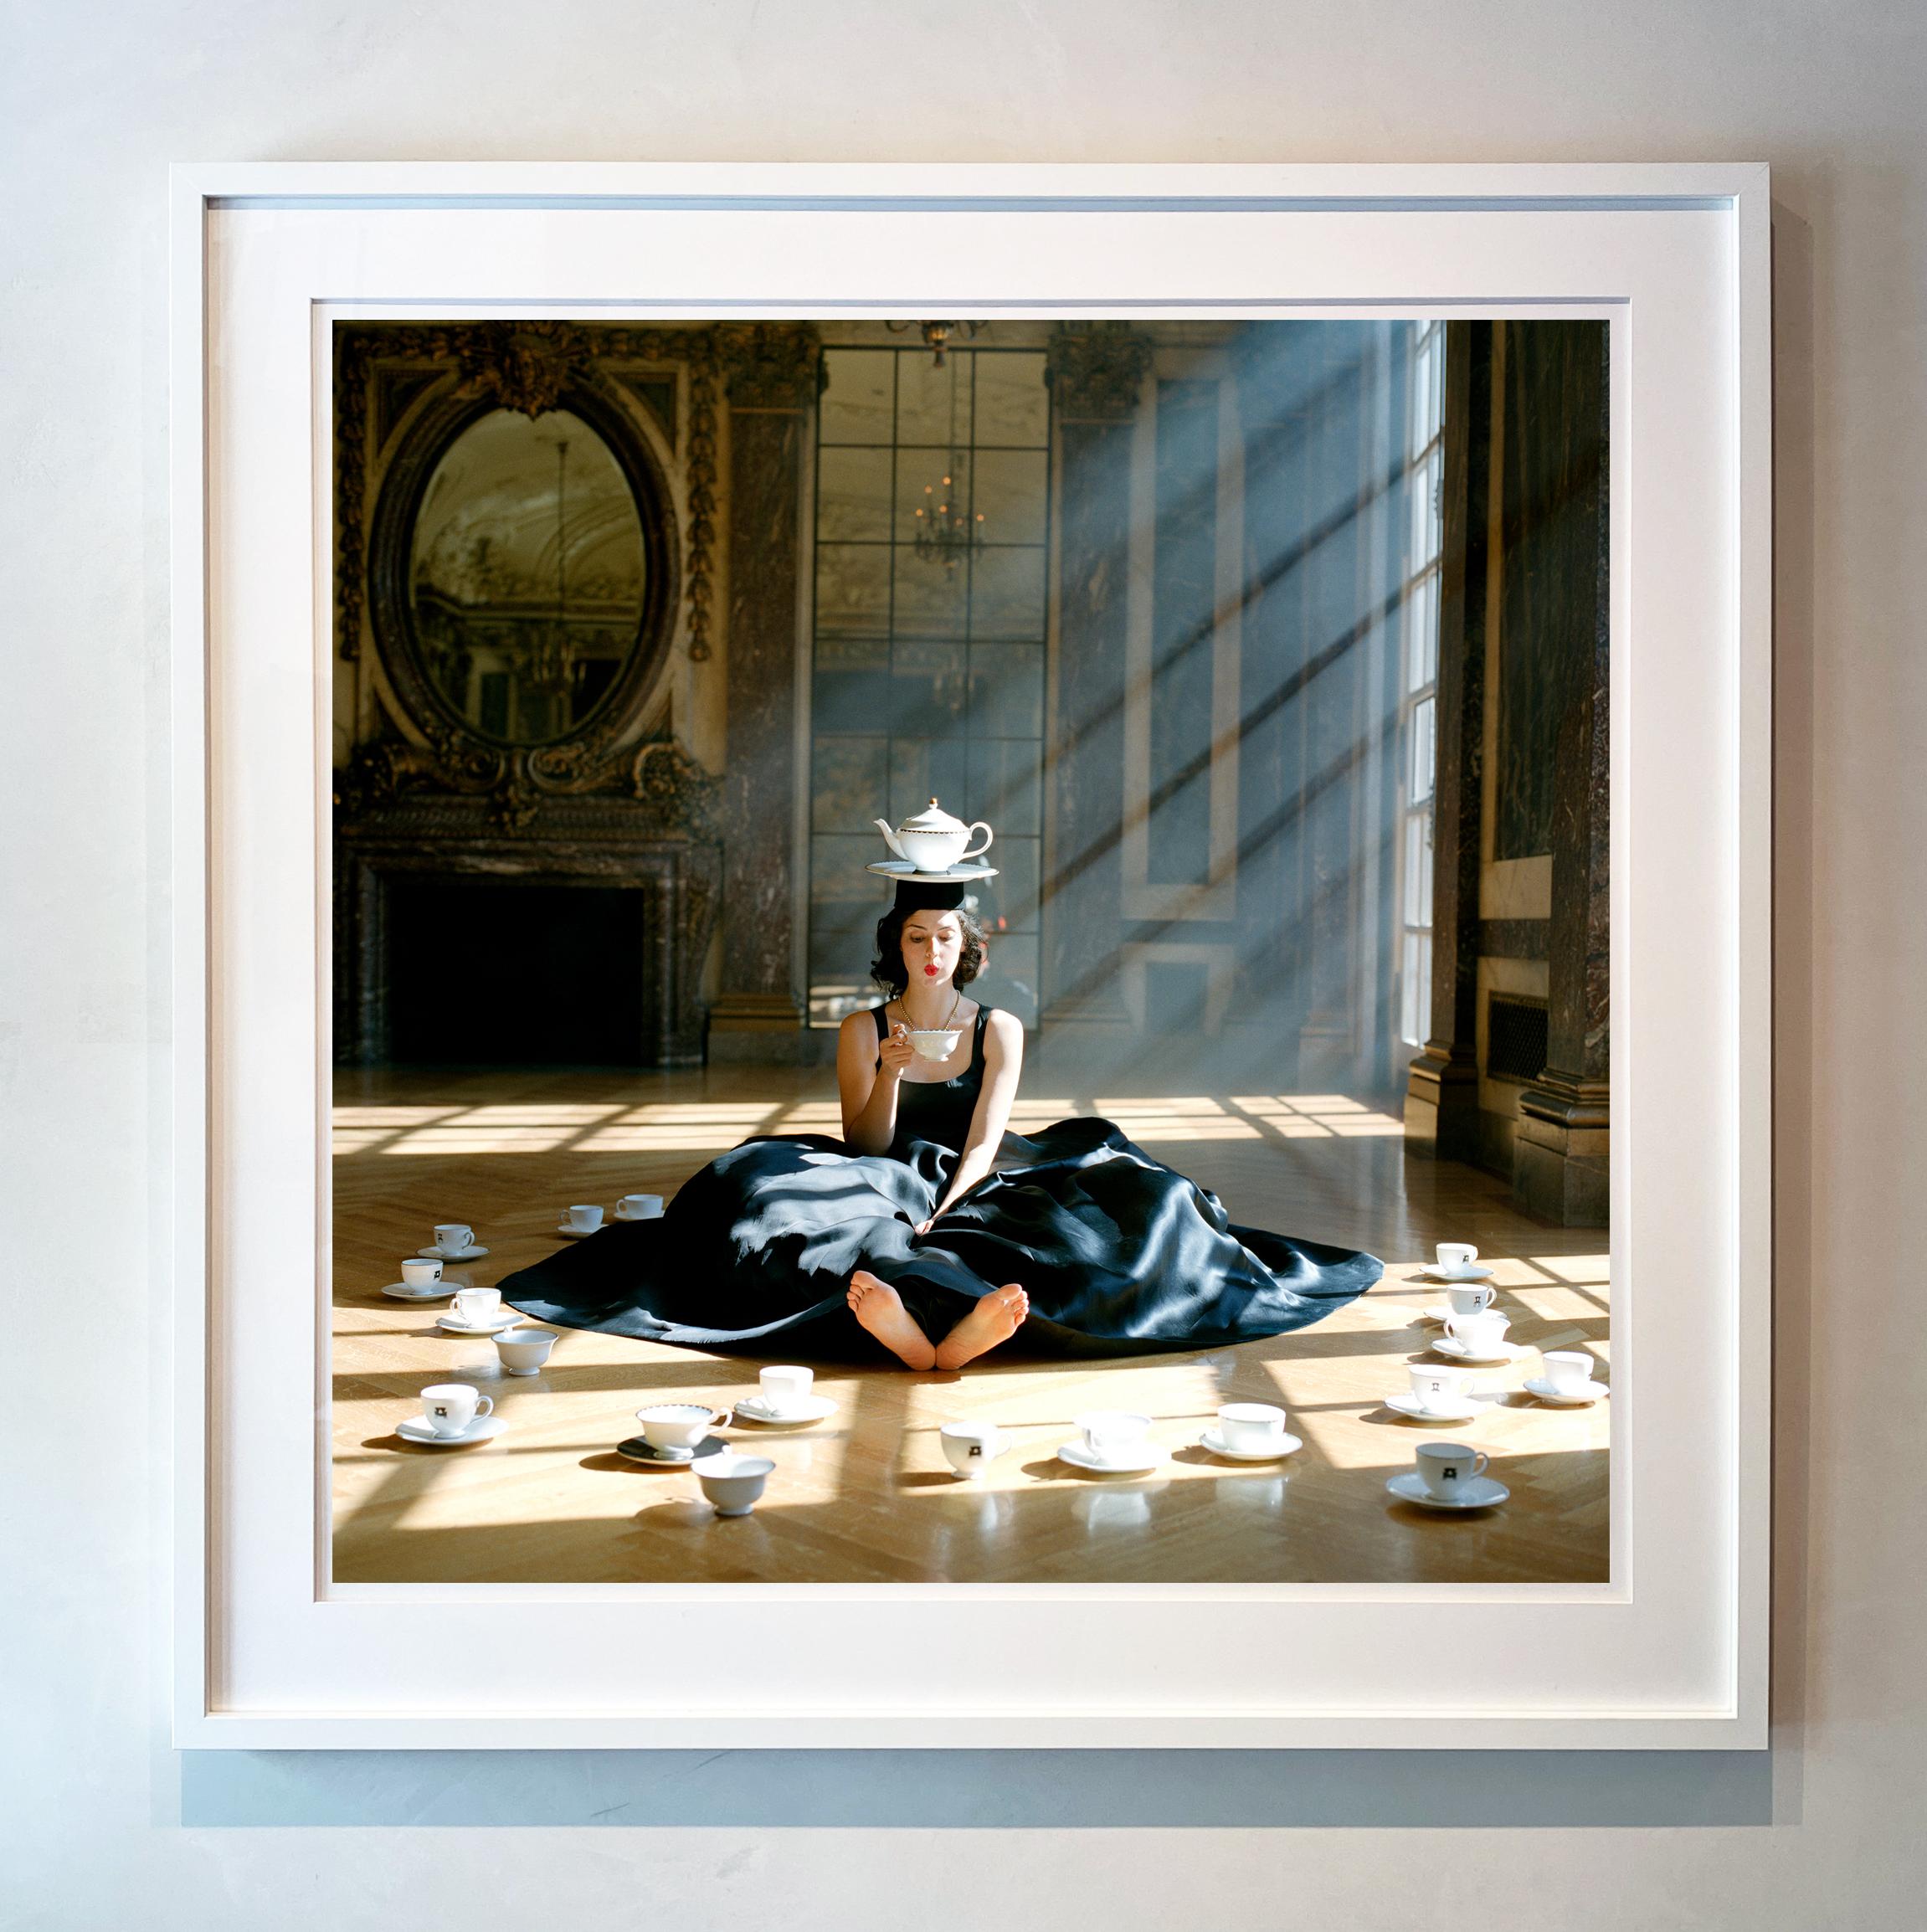 Zoe Balancing Teapot on Head, Burden Mansion, NY - 50 x 50 inches framed - Contemporary Photograph by Rodney Smith